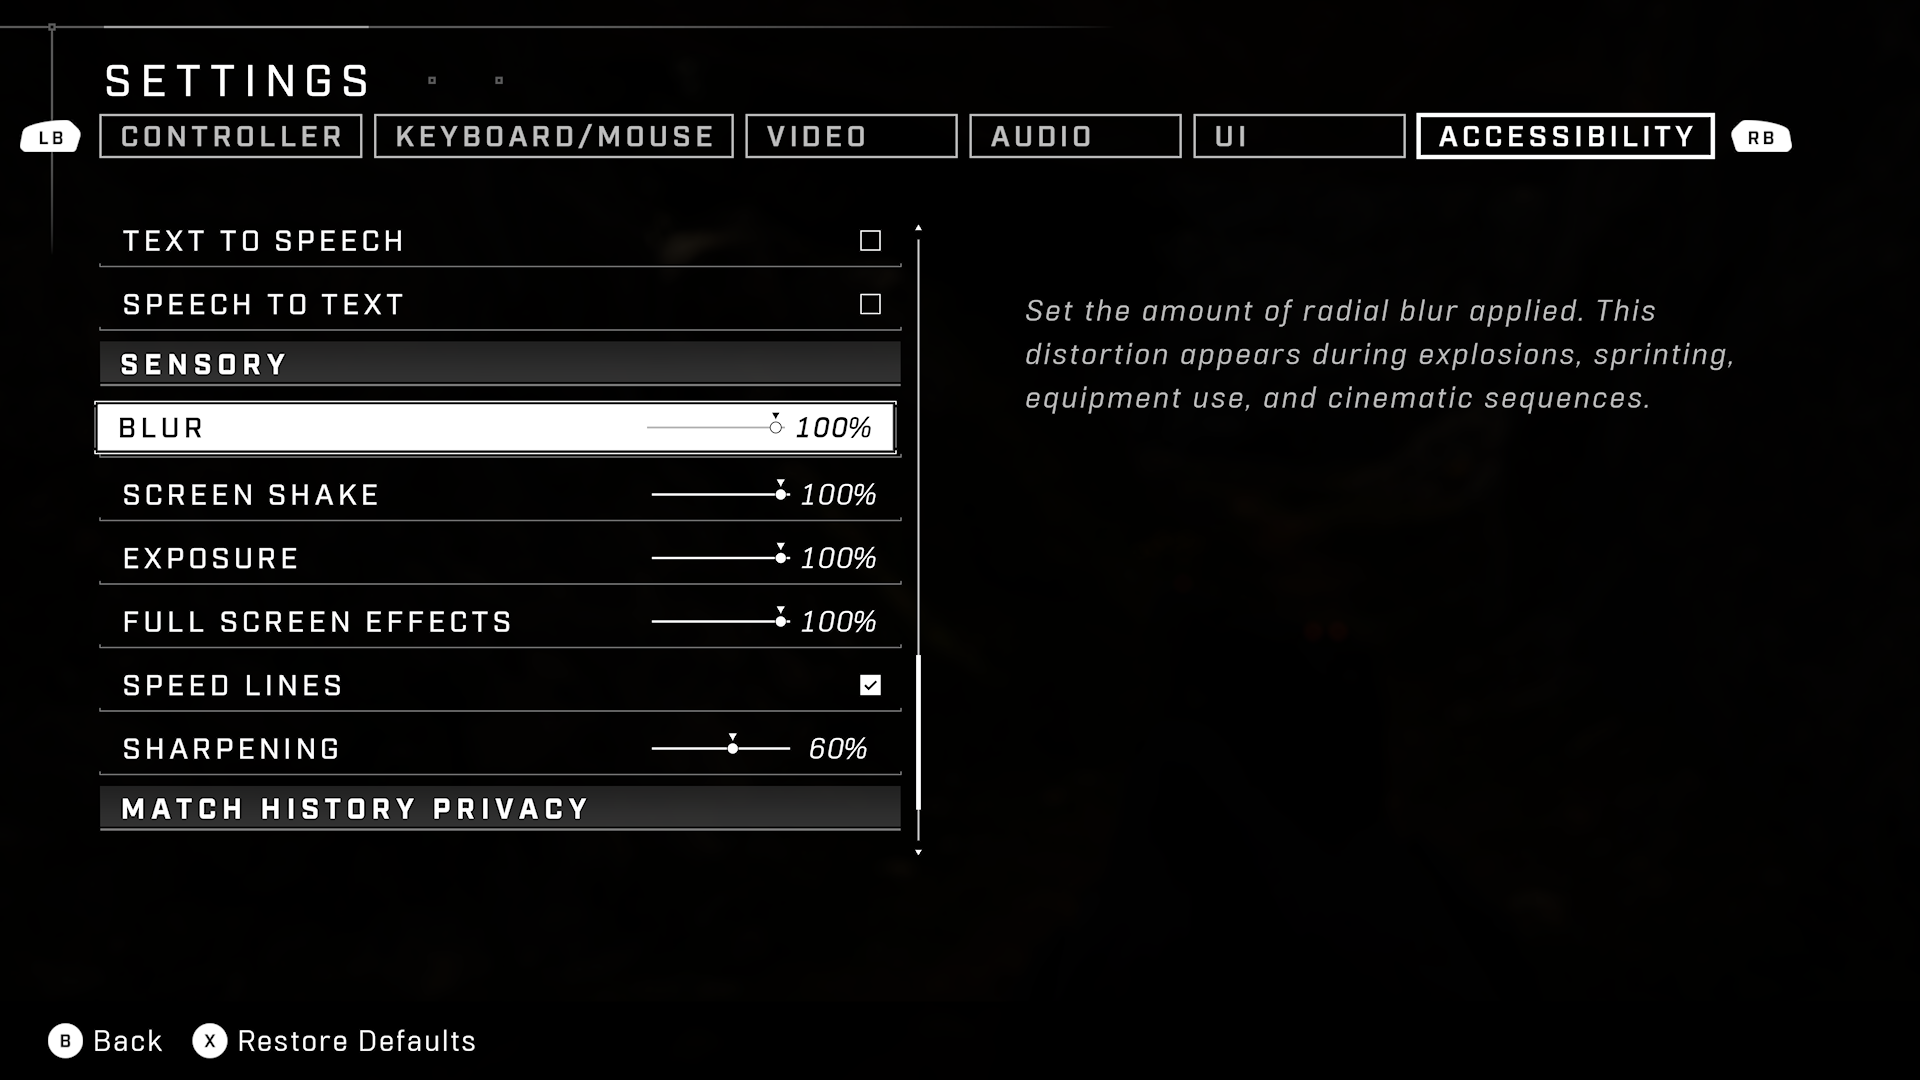 Halo Infinite screenshot of the Accessibility section of the Settings menu where the Blur setting is highlighted and set to 100%.